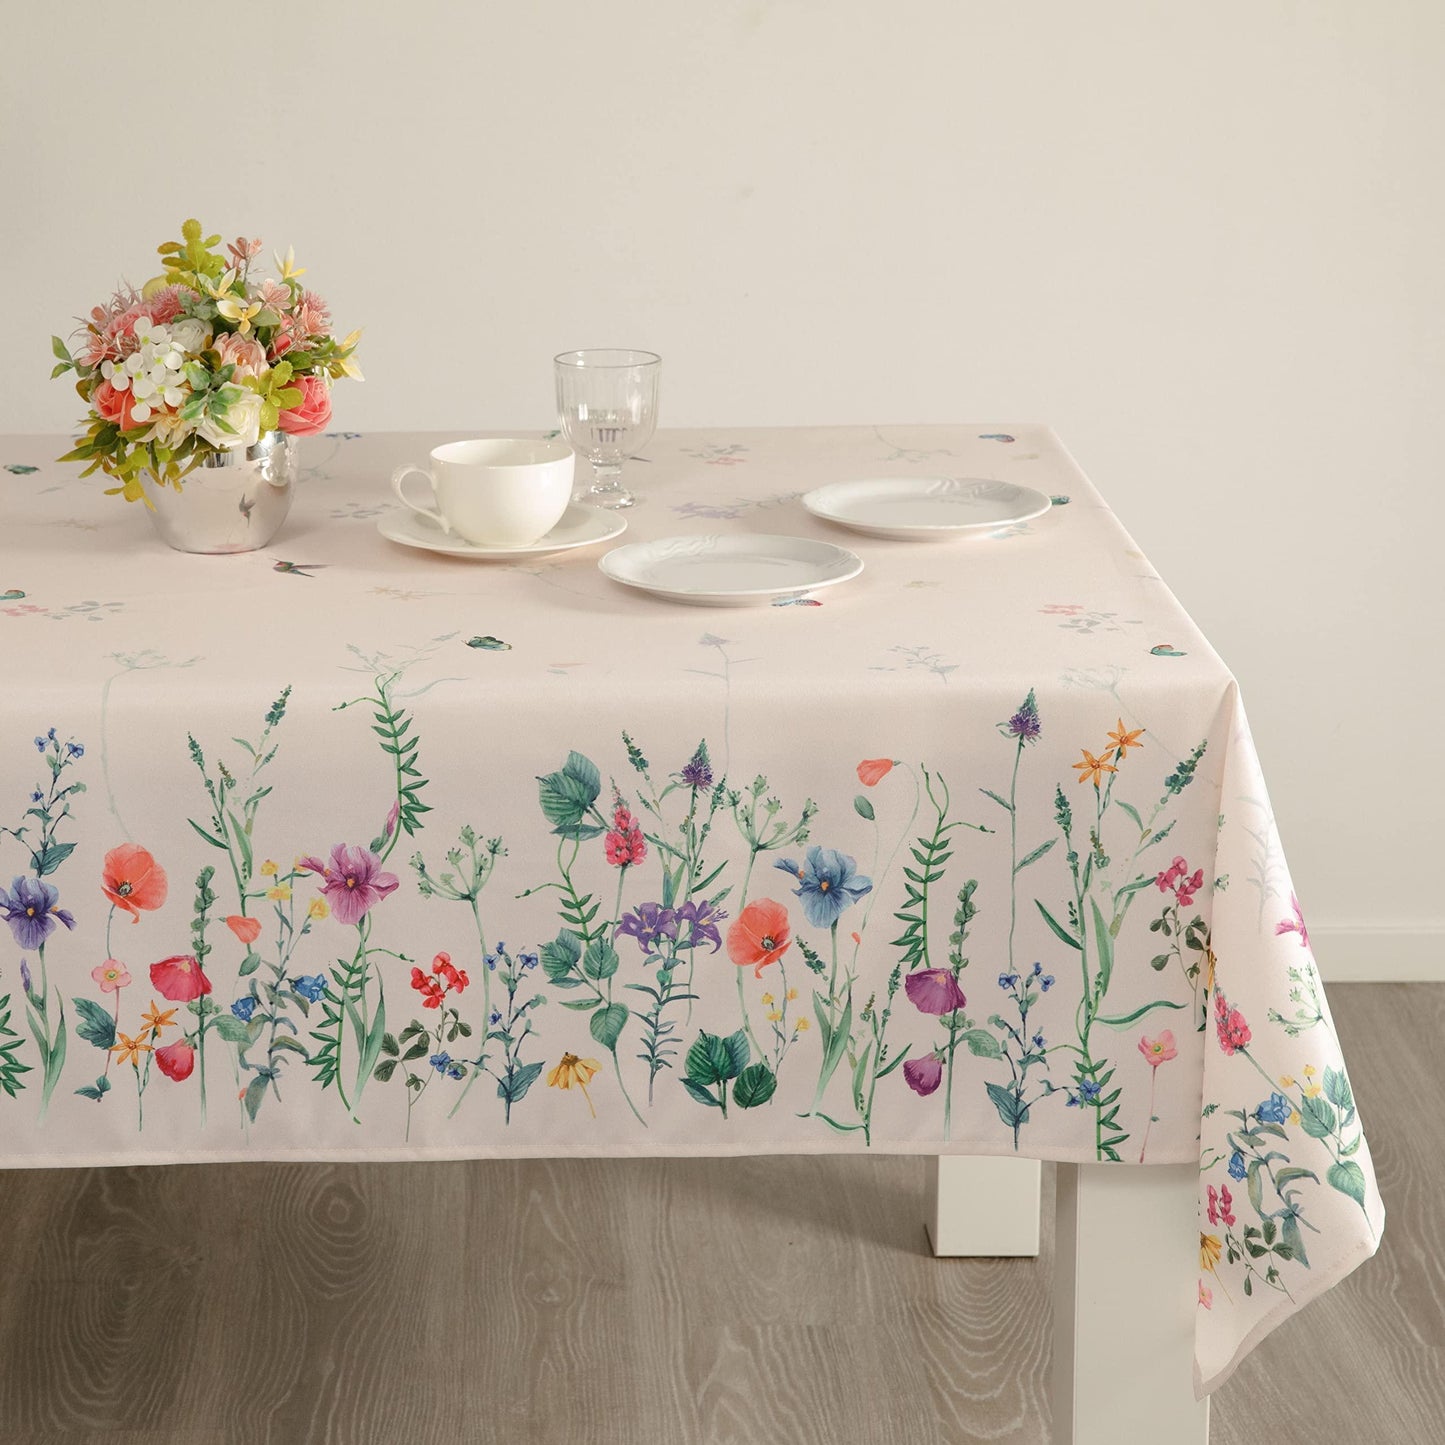 Watercolor Party Flowers Square Easter Tablecloth Non Iron Stain Resistant Easter Table Cover Kitchen Dining Room Spring Dinner Party Wedding Decorations Square 52 x52 - Loomini